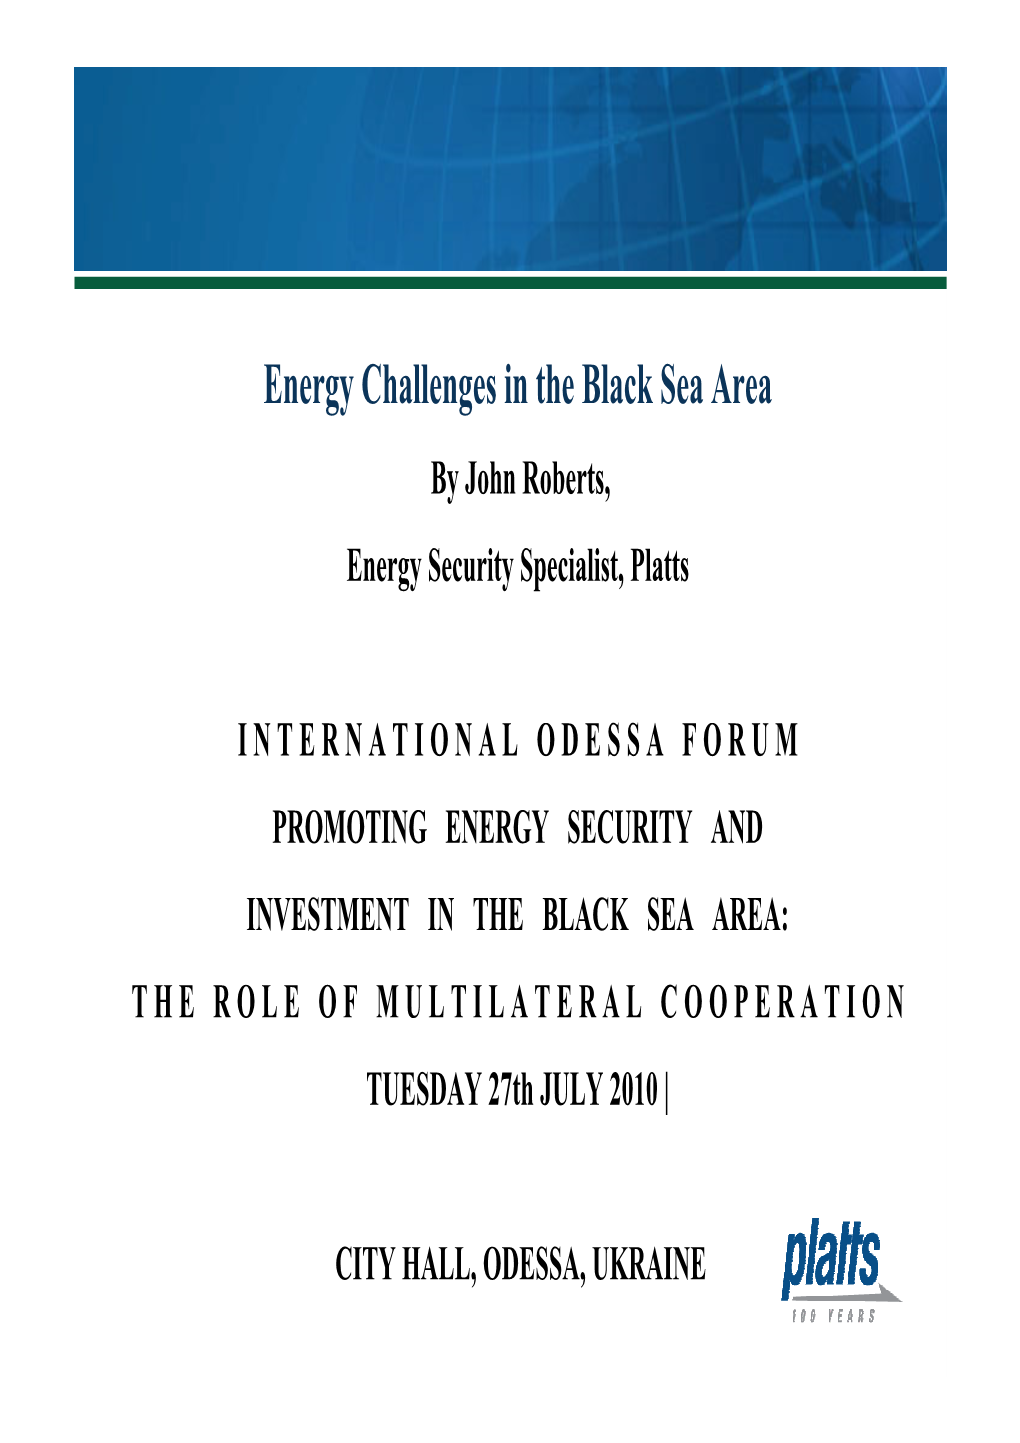 Energy Challenges in the Black Sea Area by John Roberts, Energy Security Specialist, Platts